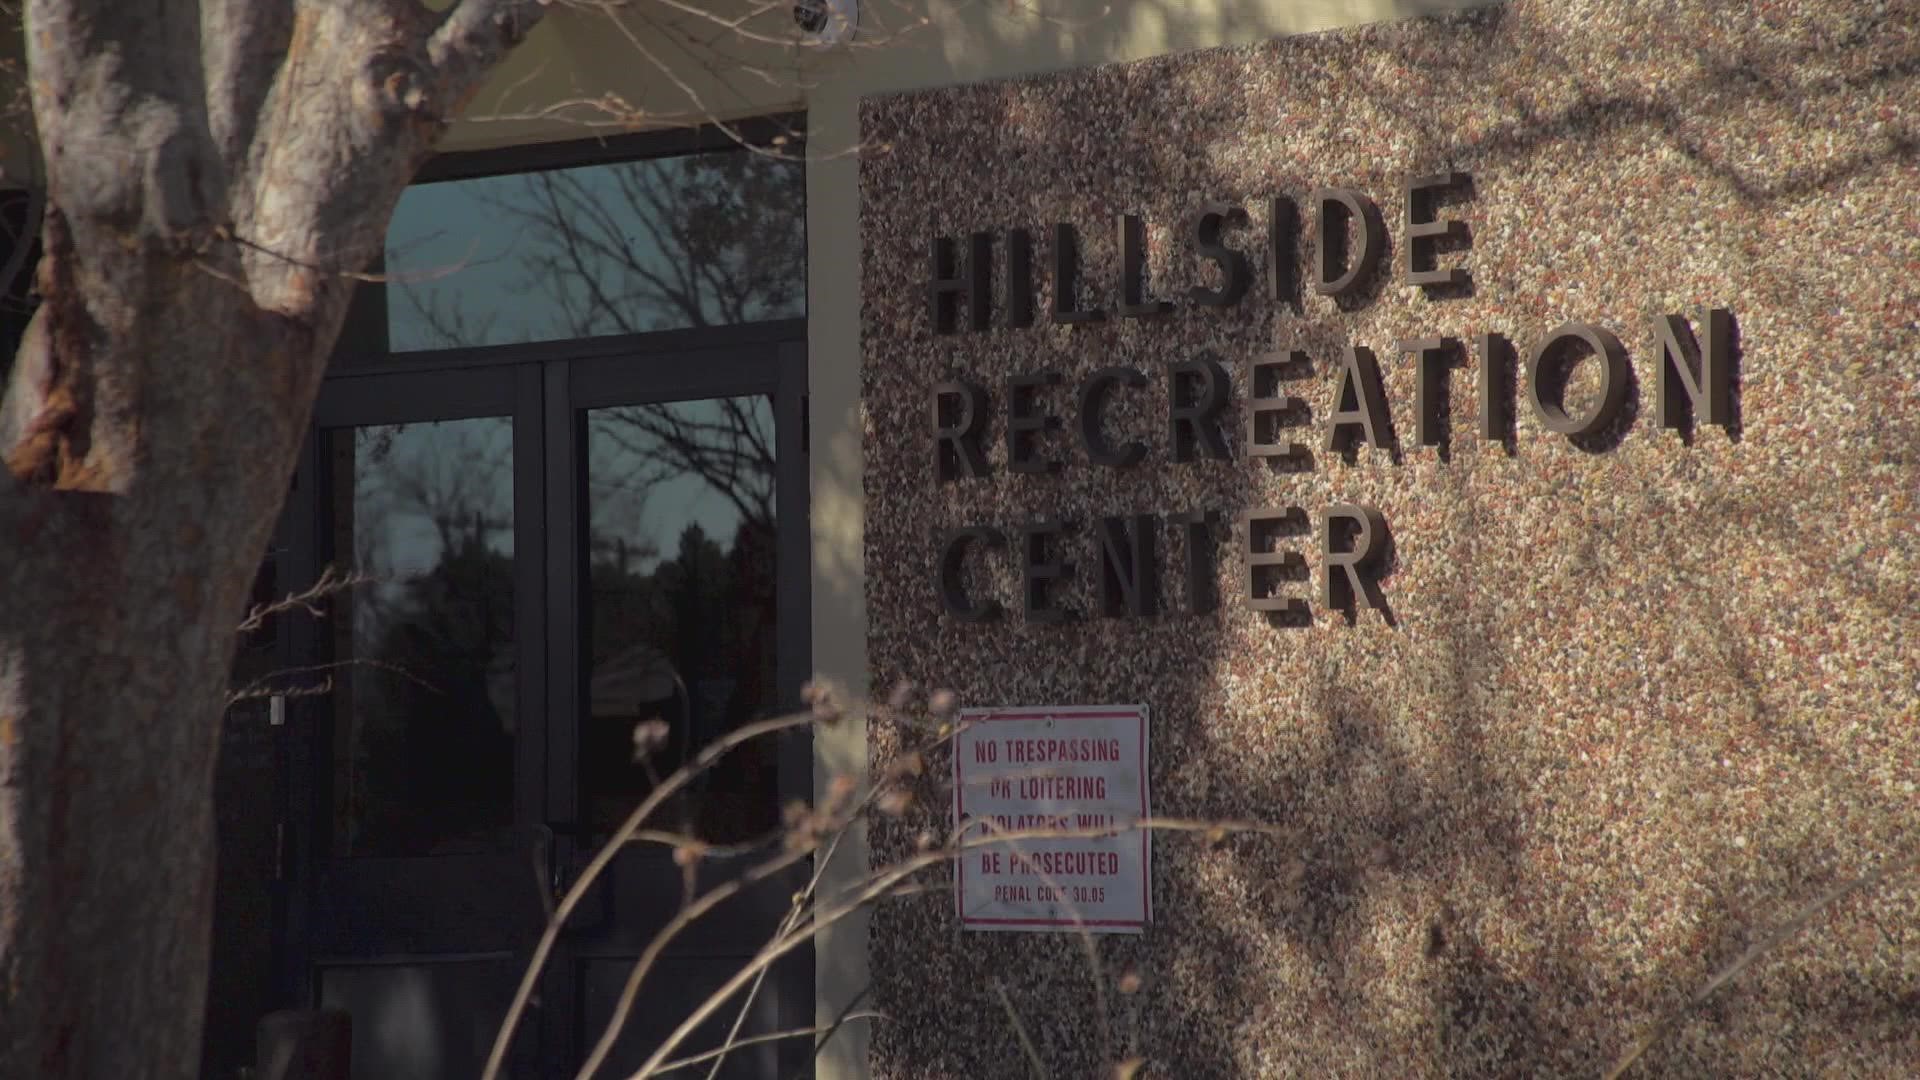 The council is scheduled to possibly vote on changing Hillside Recreation Center to the Atatiana Carr-Jefferson at Hillside Community Center